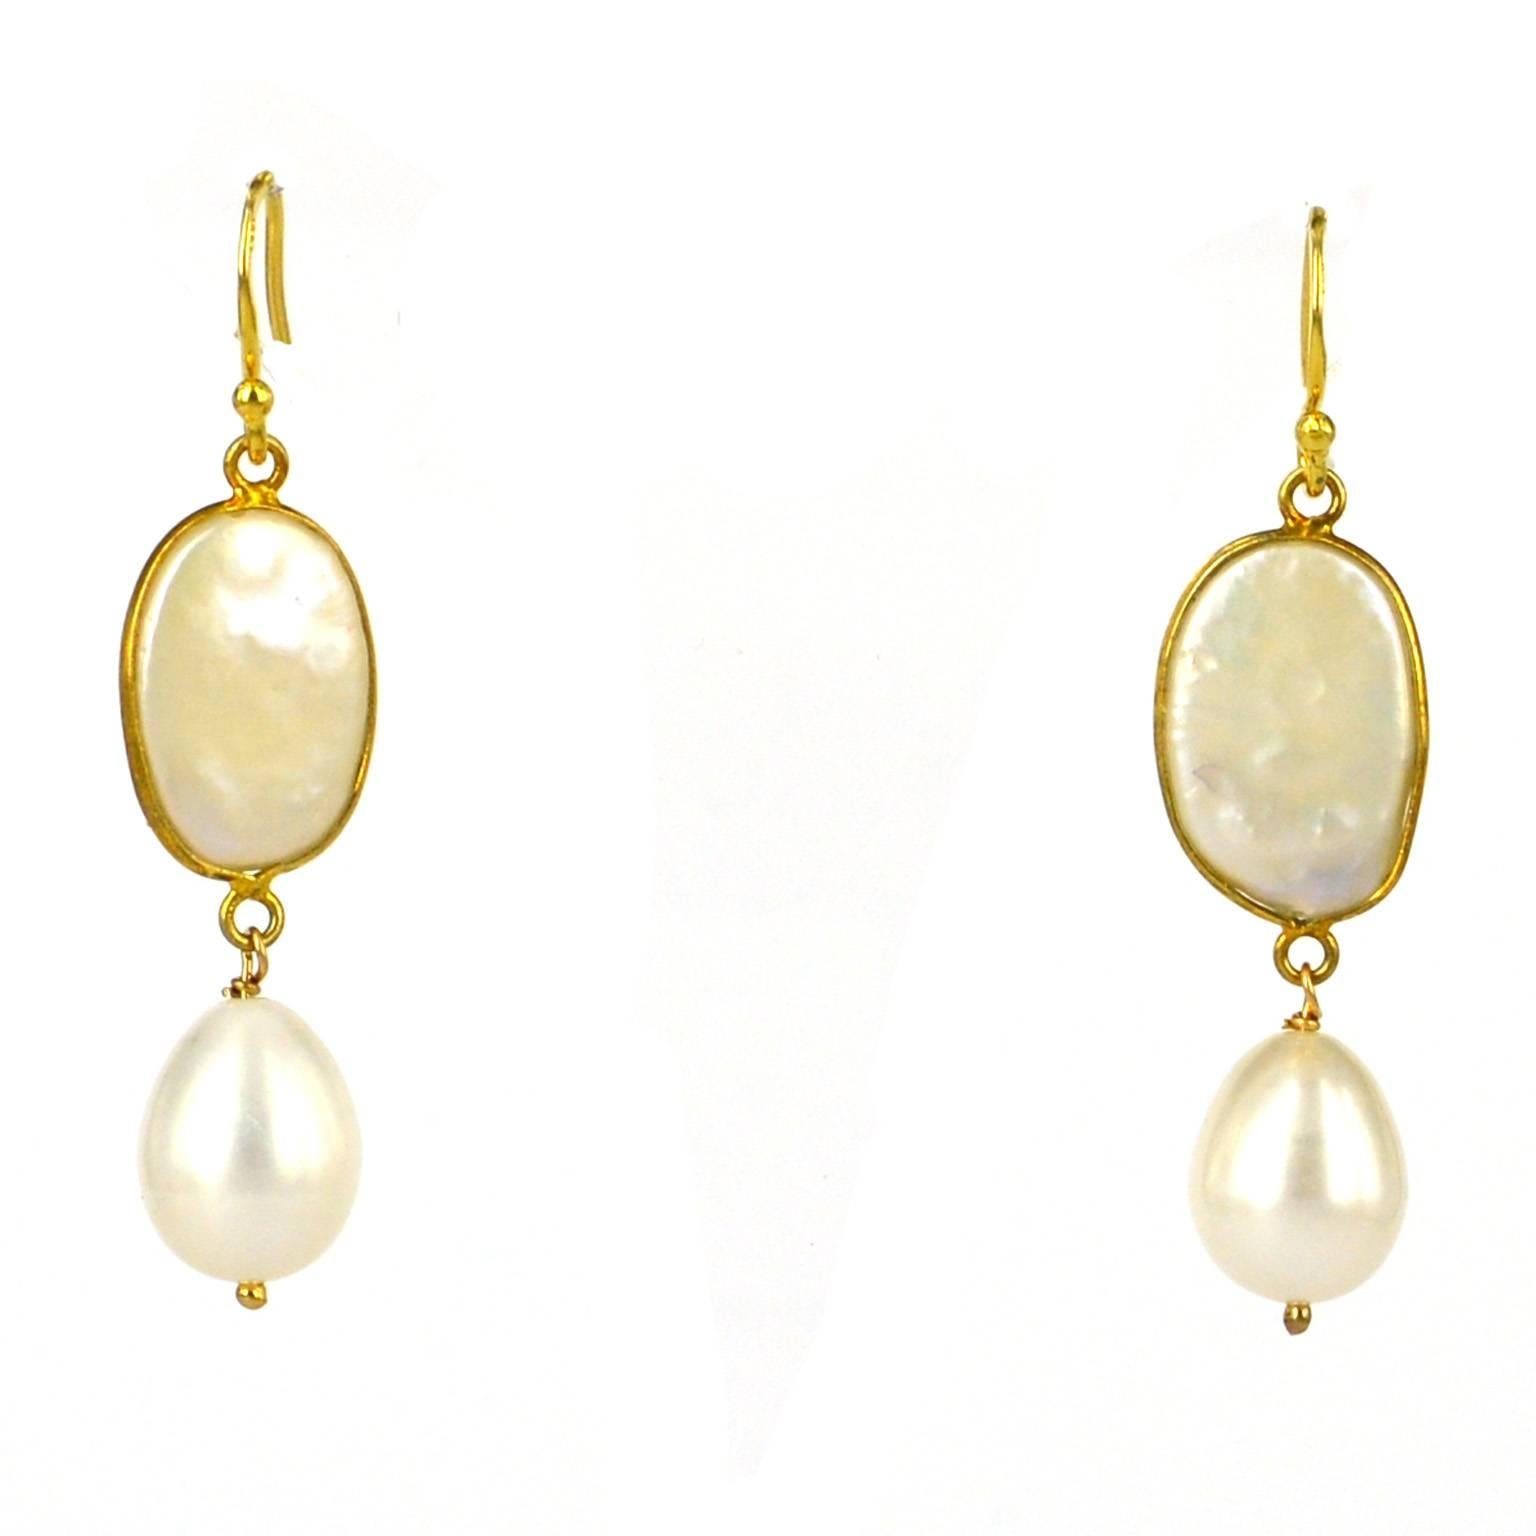 Double drop of Fresh Water Pearls, Gold plate Sterling Silver encased oval Pearl is 12x17mm with a 10x14mm Teardrop hanging below.
Gold plate Sterling Silver sheppard 14k Gold filled headpin.
total Earring length is 51mm
